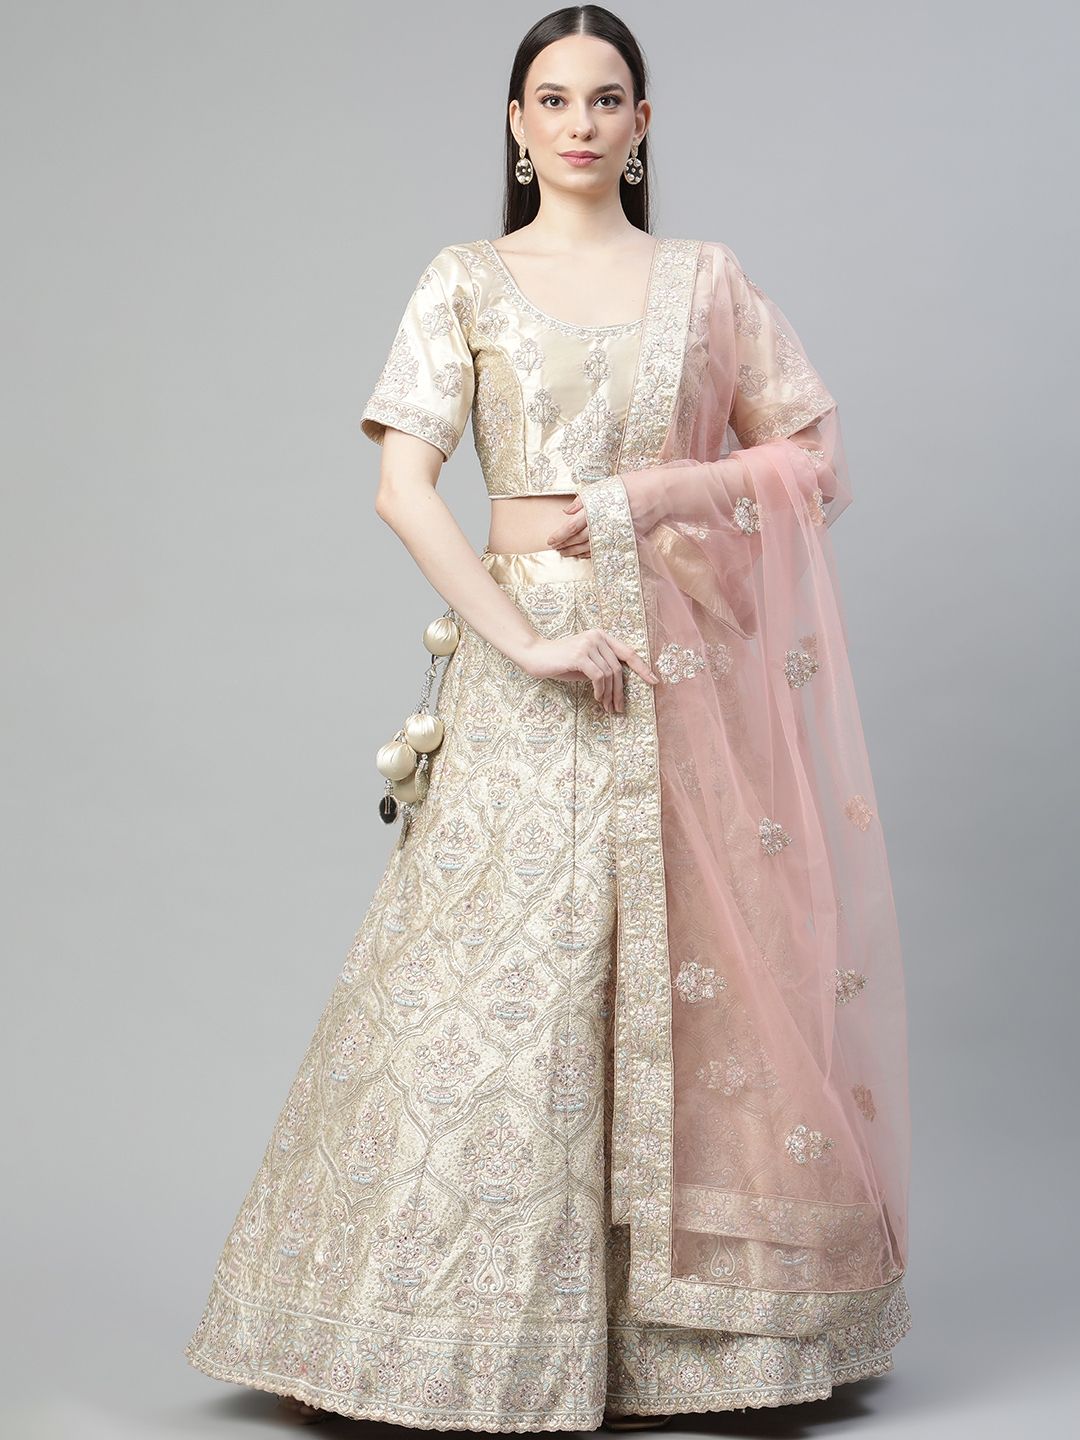 Readiprint Fashions Cream-Coloured Embroidered Beads and Stones Semi-Stitched Lehenga & Unstitched Blouse Price in India